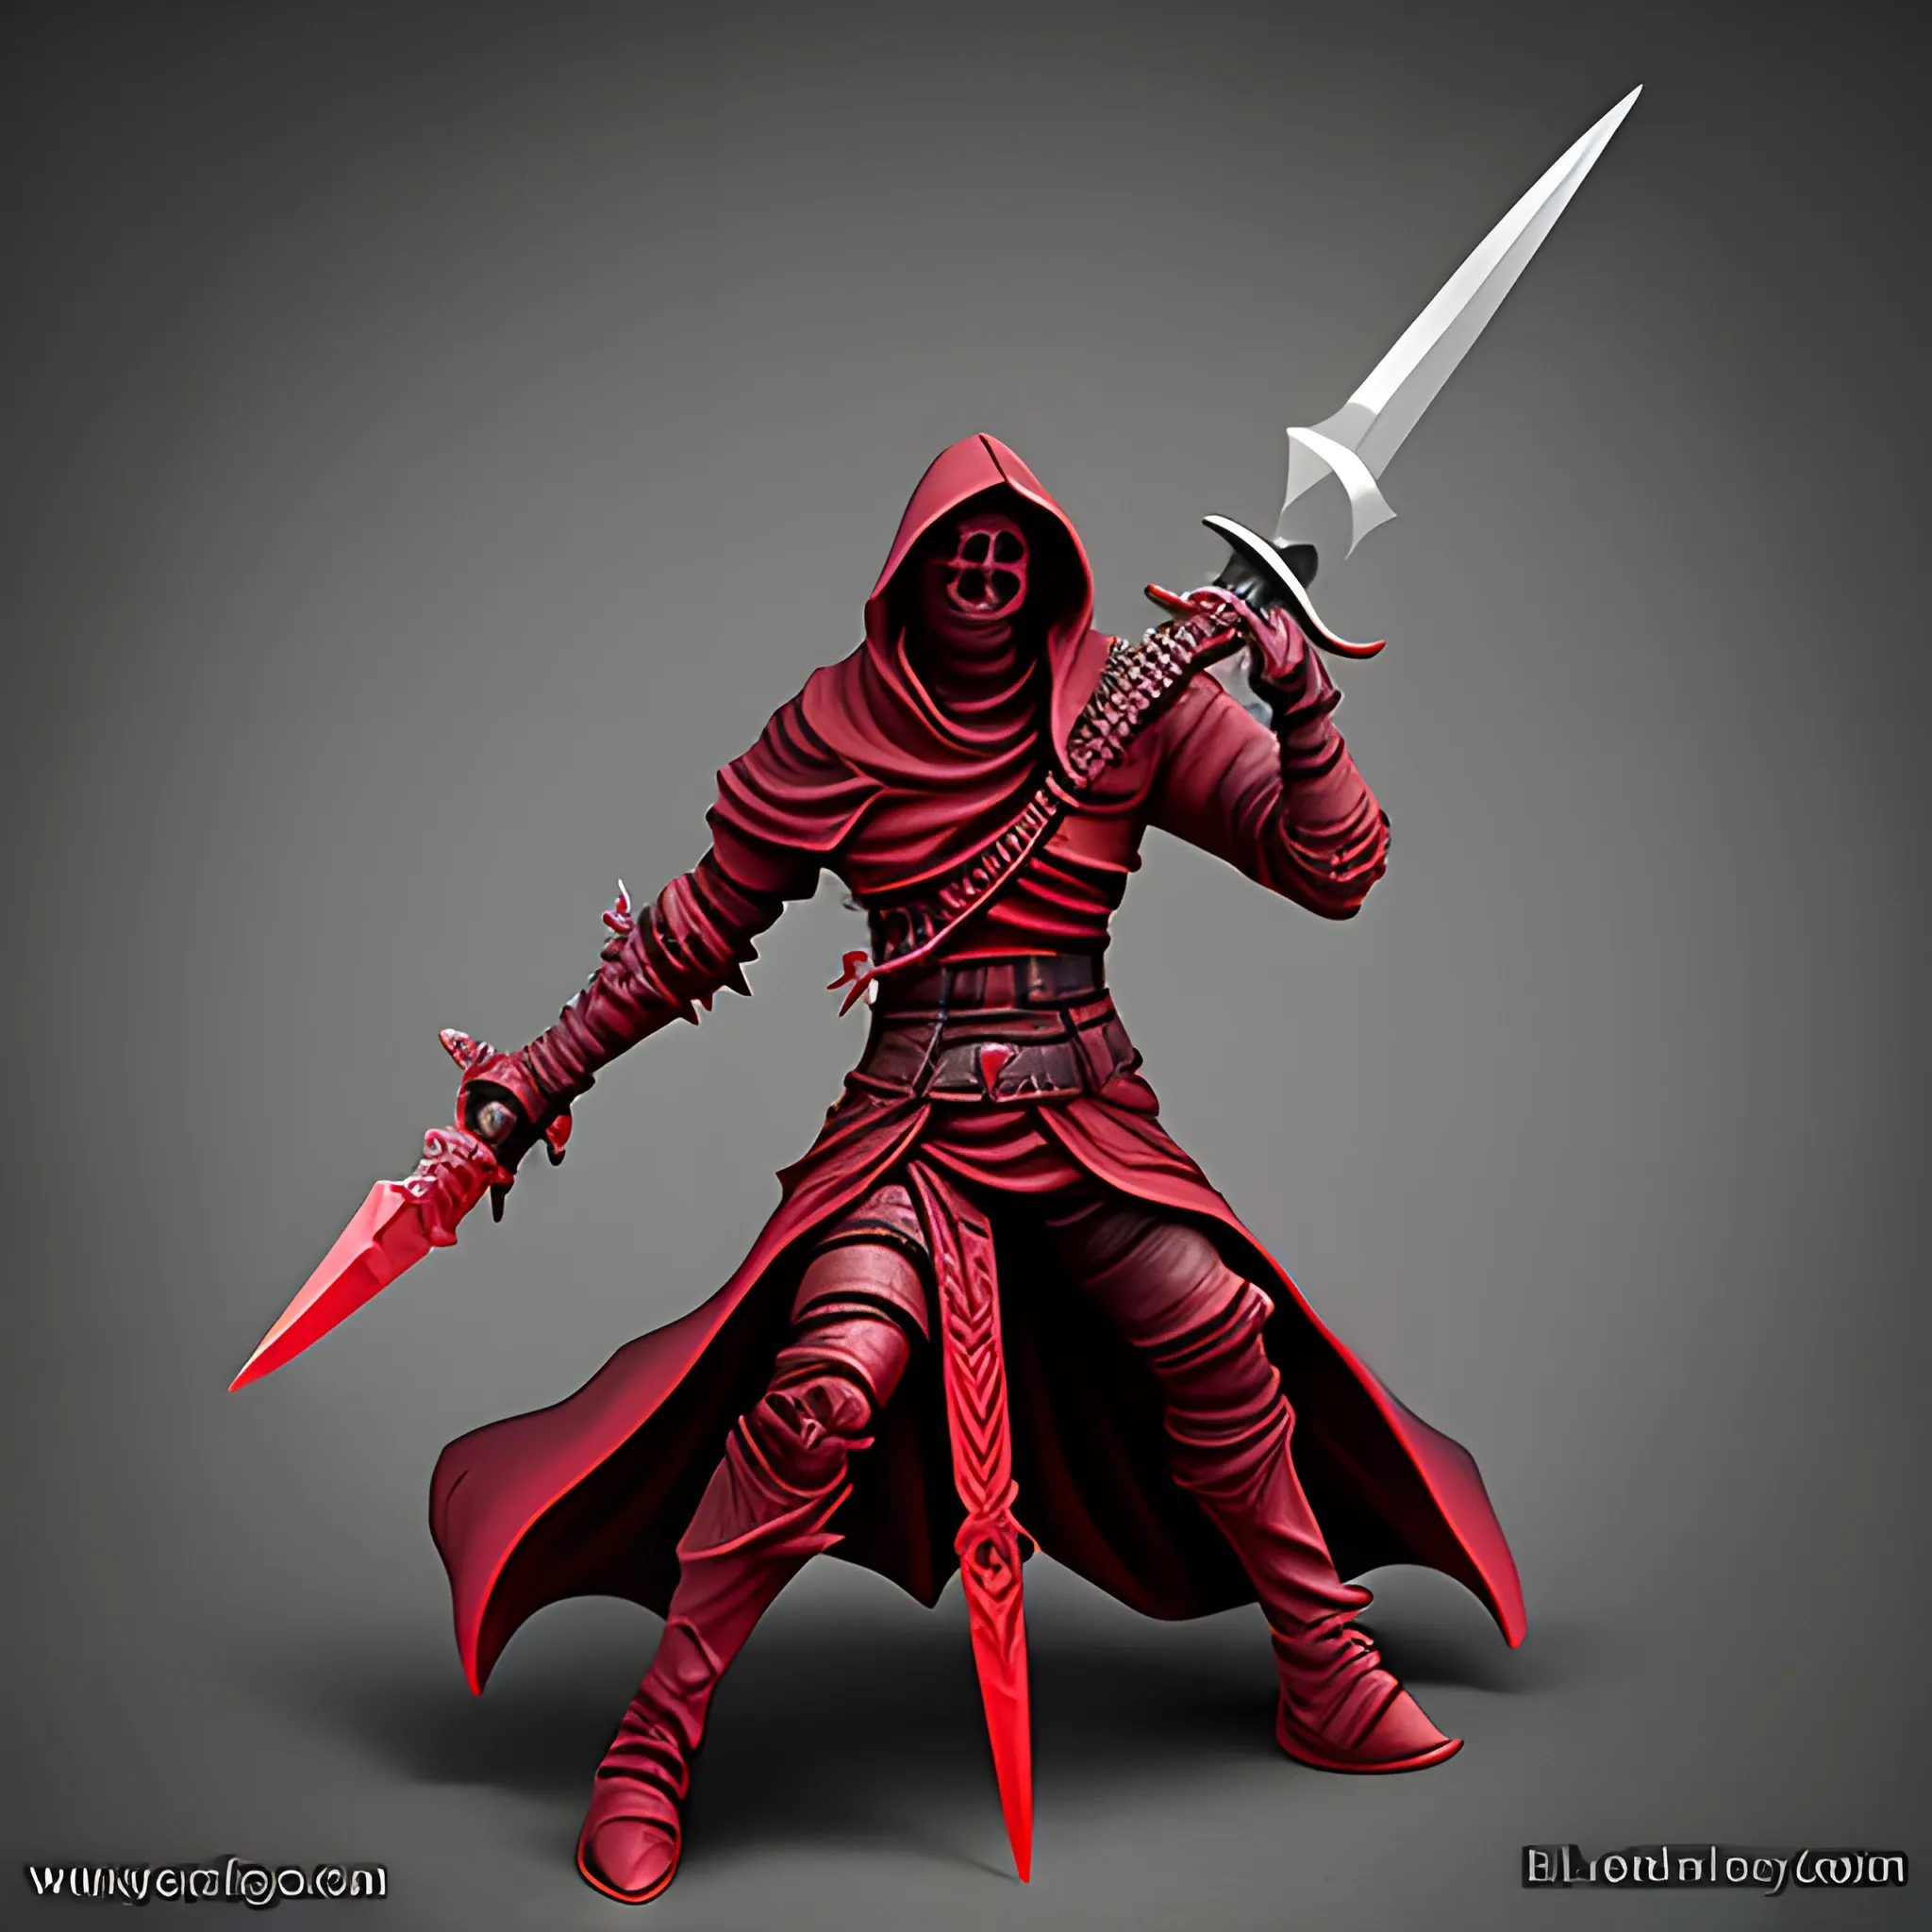 Create a redrobed cultist with daggers
